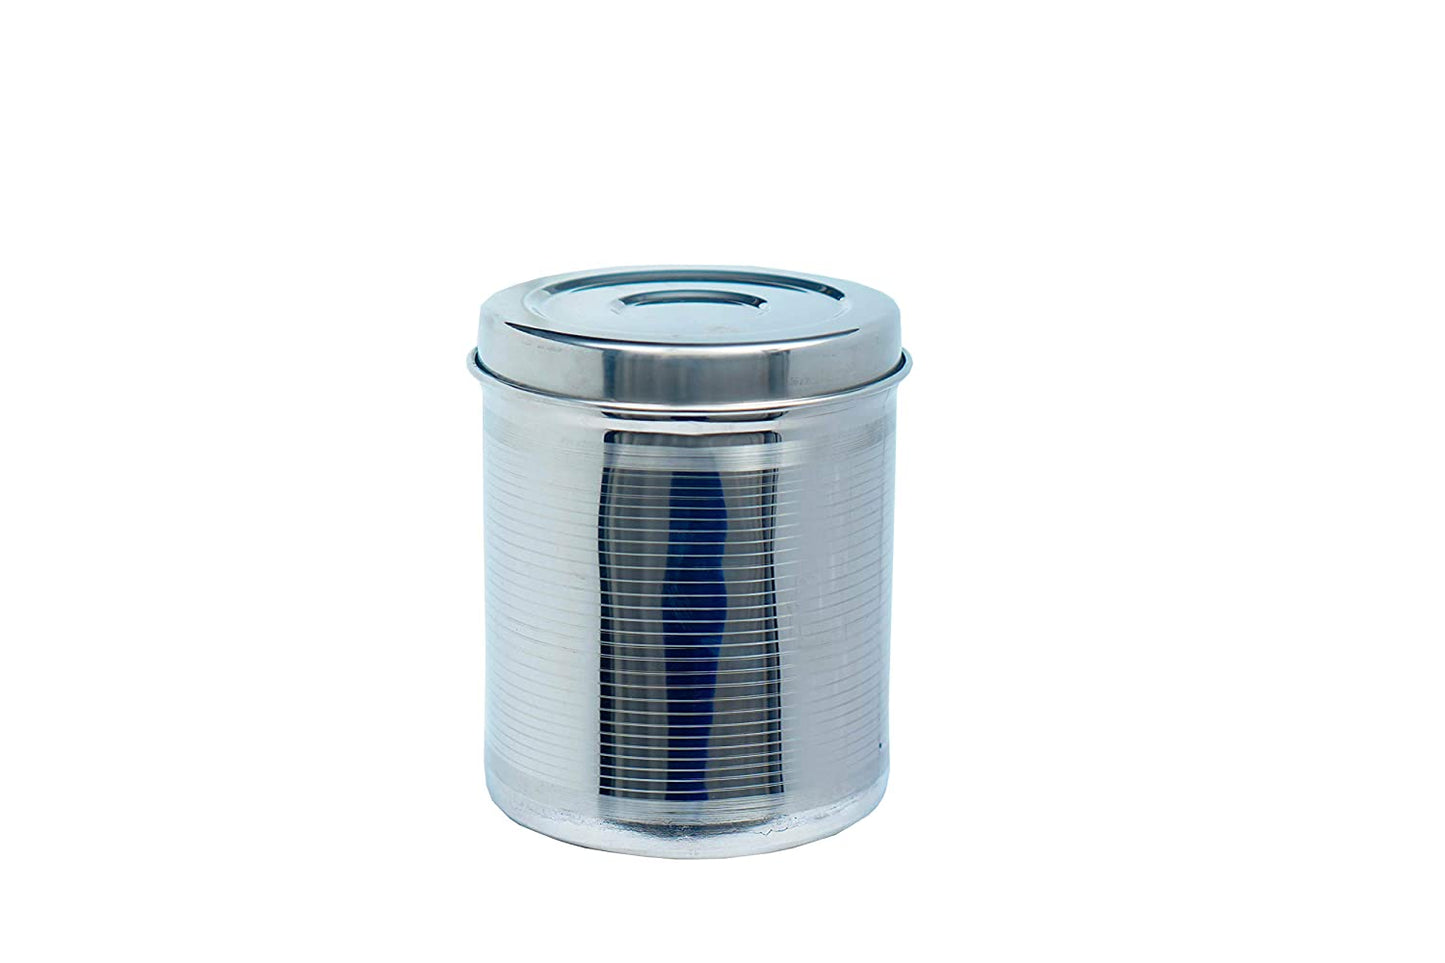 Stainless Steel Canister Set Of 4 Pcs - 600 ml, 900 ml, 1200 ml, 1600 ml